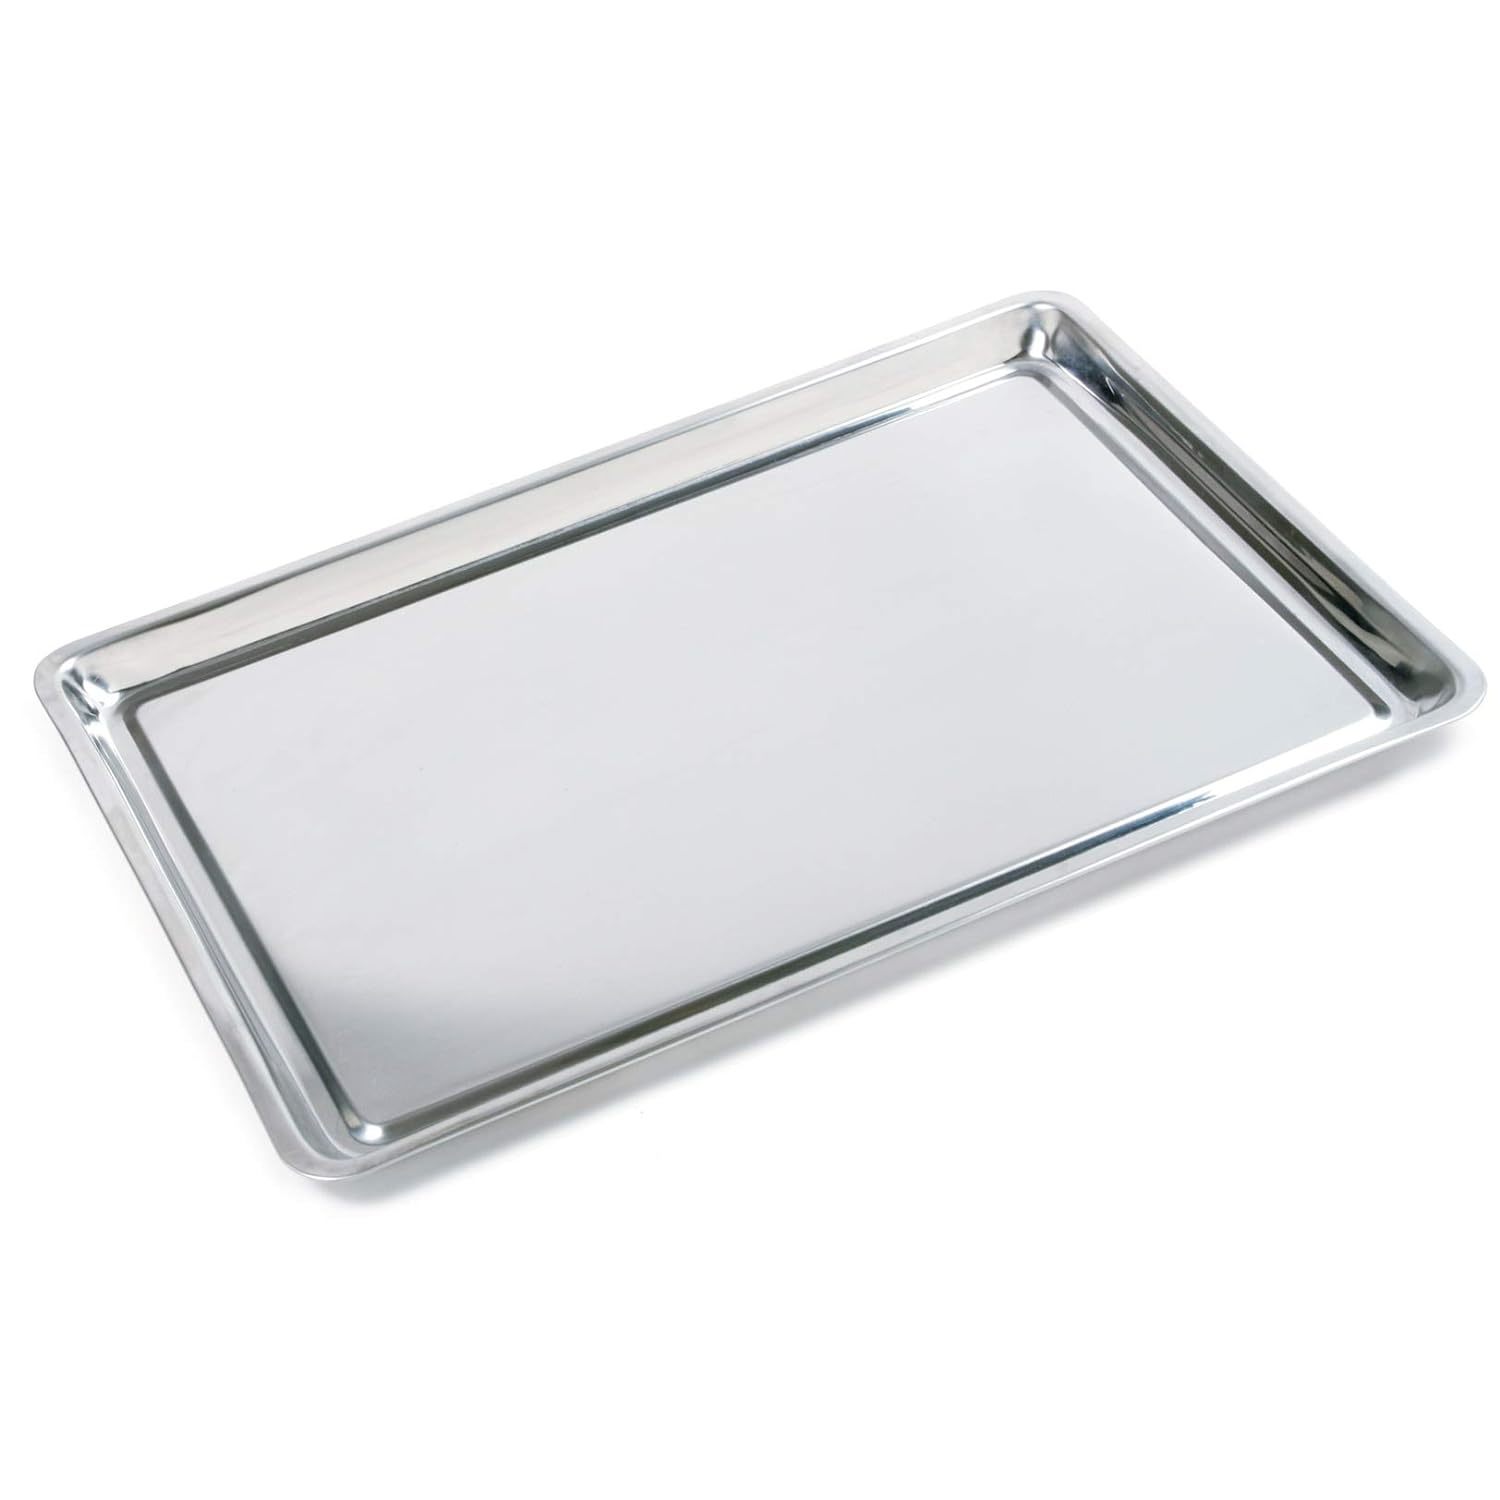 Norpro Stainless Steel Jelly Roll Baking Pan 15 inches x 10 inches x 1 inches - $40.99